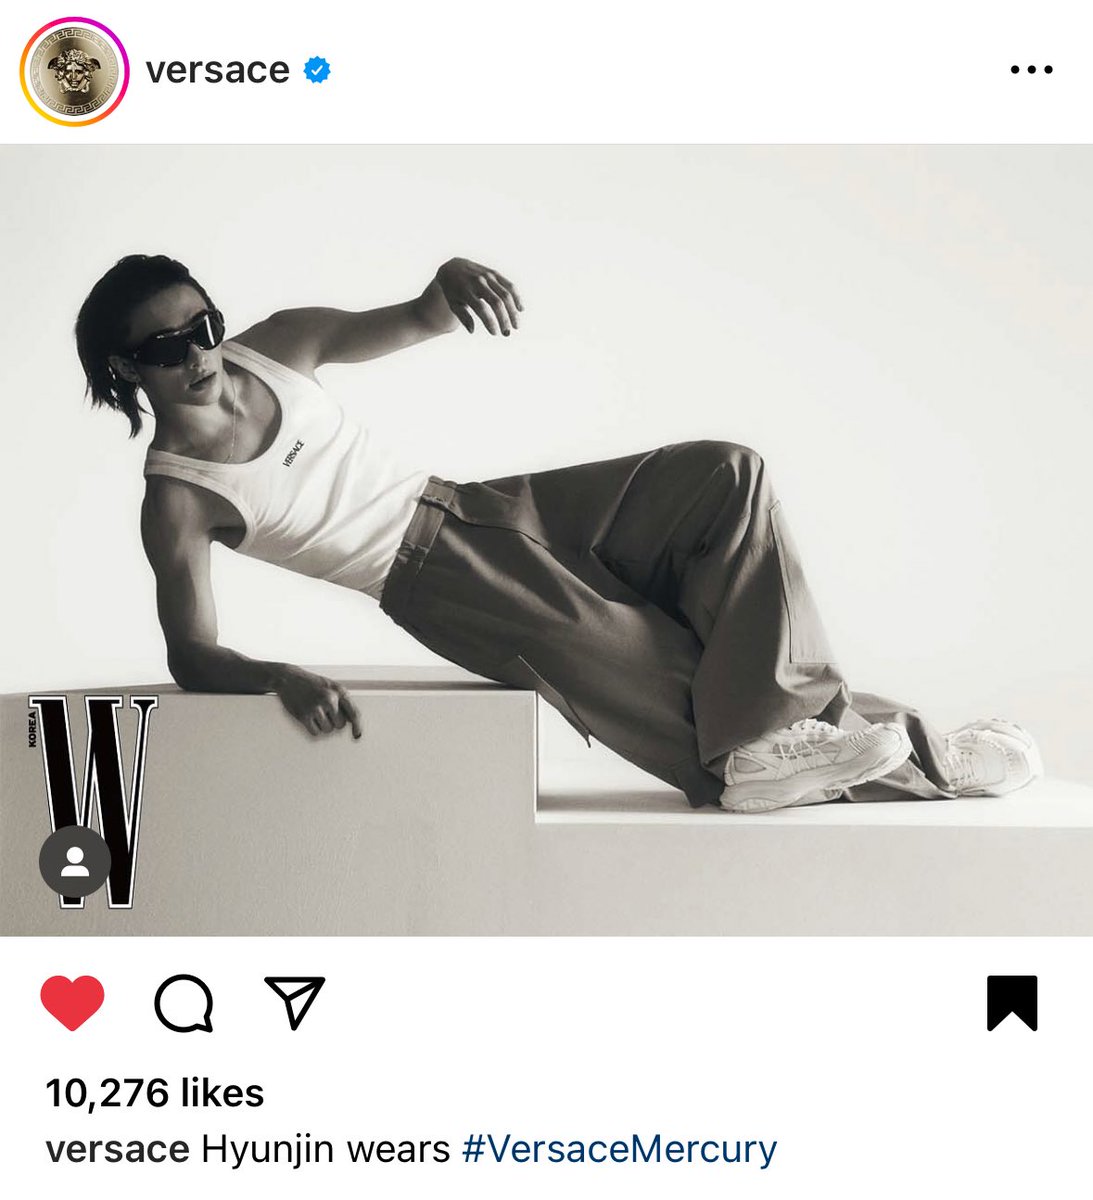 Versace posted #Hyunjin wearing the new Mercury Shoes on their Instagram account! Make sure to interact ✨ #HYUNJINxVERSACE #HYUNJINxWKOREA #Hyunjin #VersaceMercury